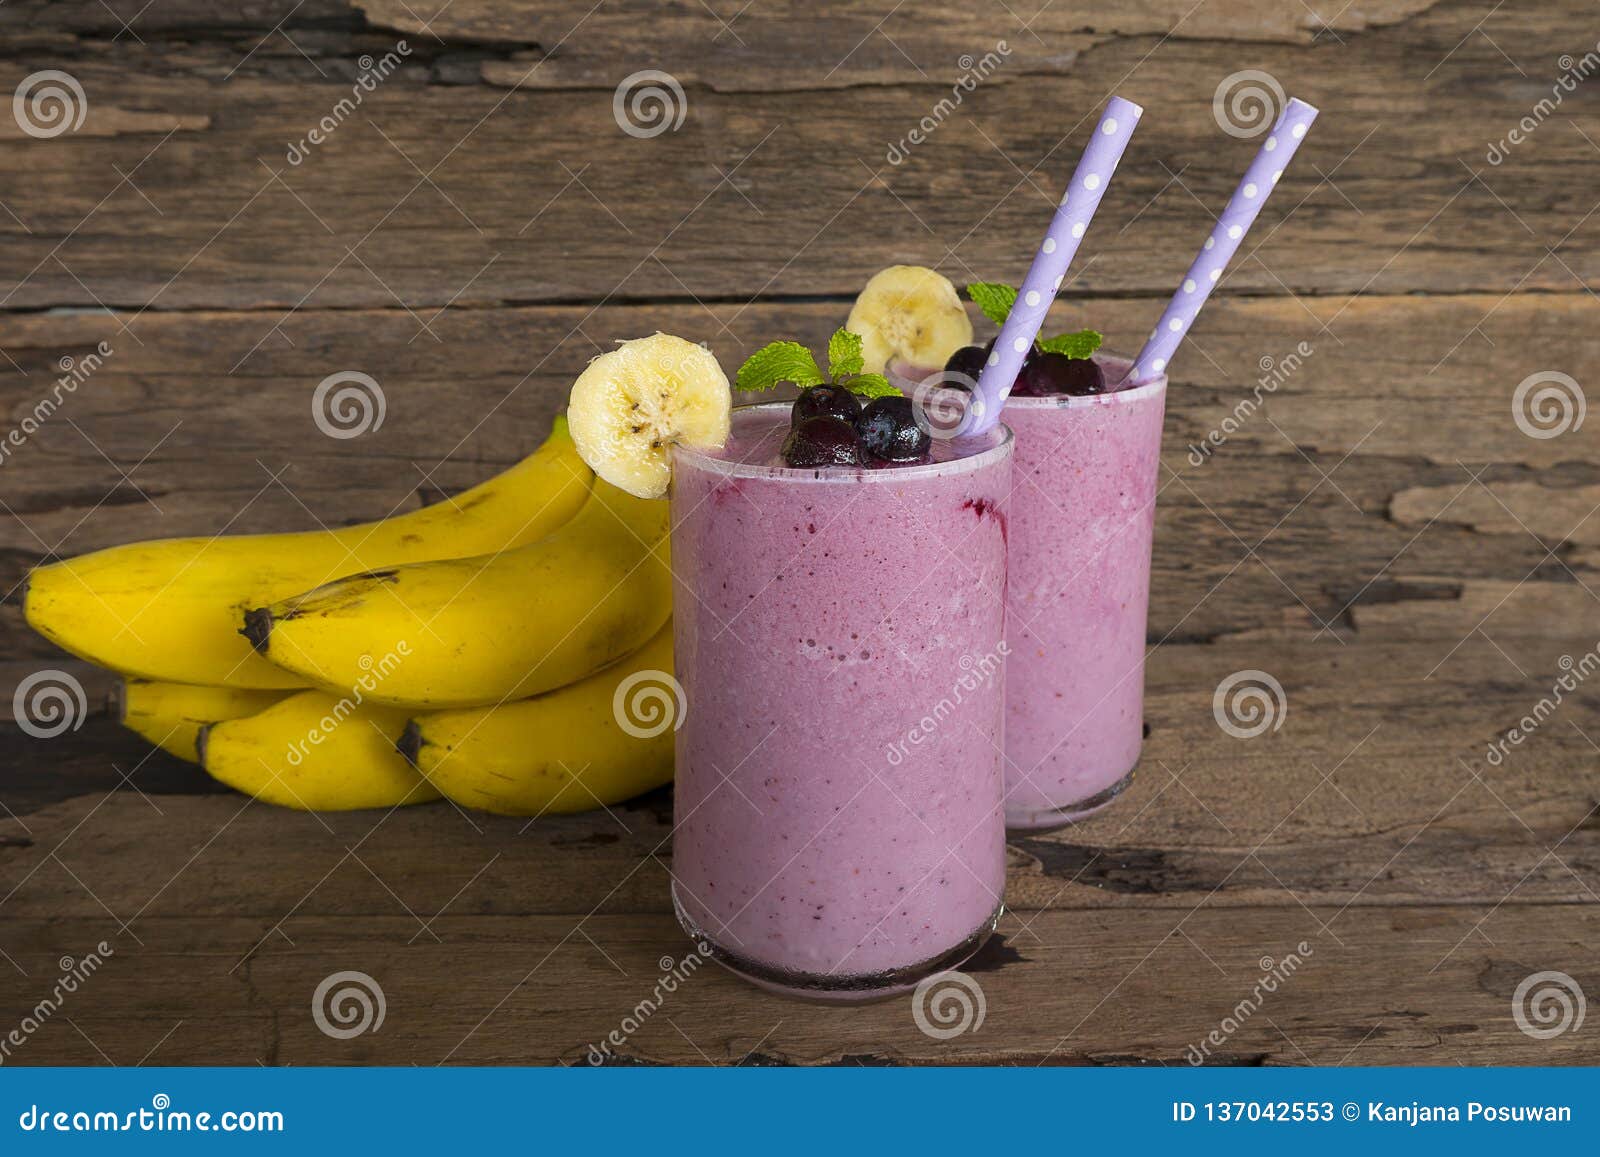 Blueberry Juice And Banana Smoothies, A Tasty Healthy ...